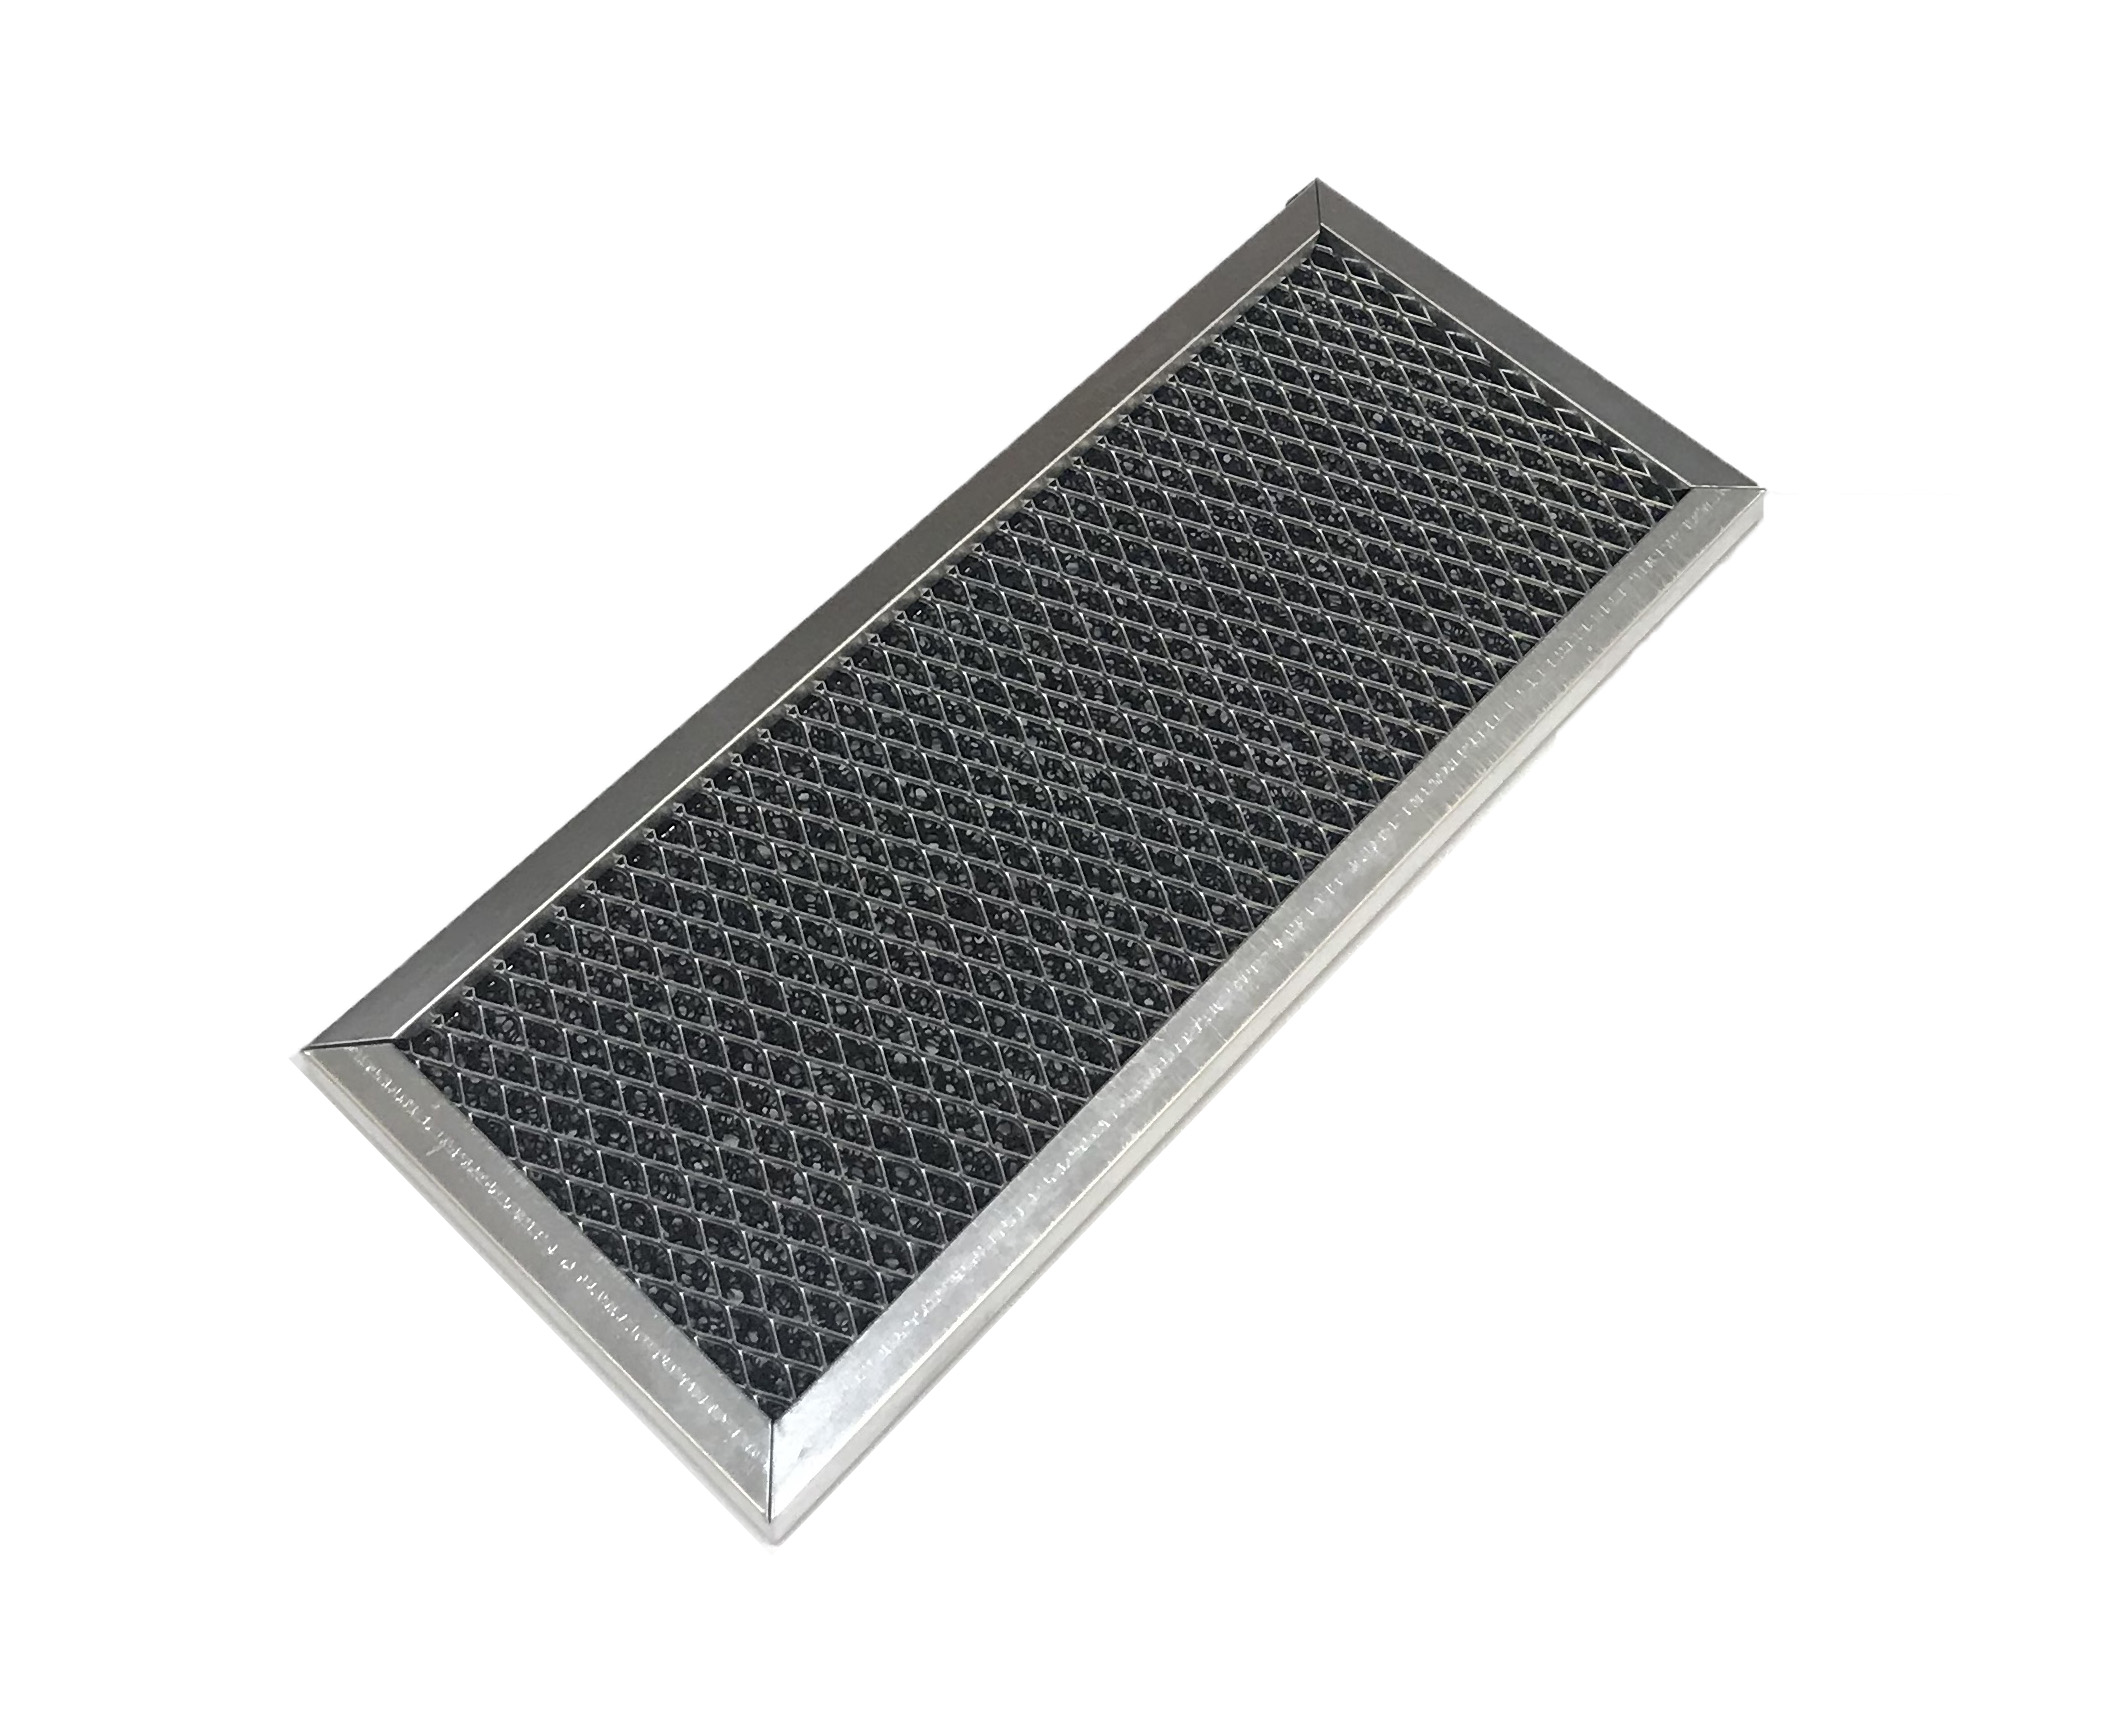 Samsung Microwave Charcoal Air Filter Shipped With SMH1816S/XAC, SMH1816W